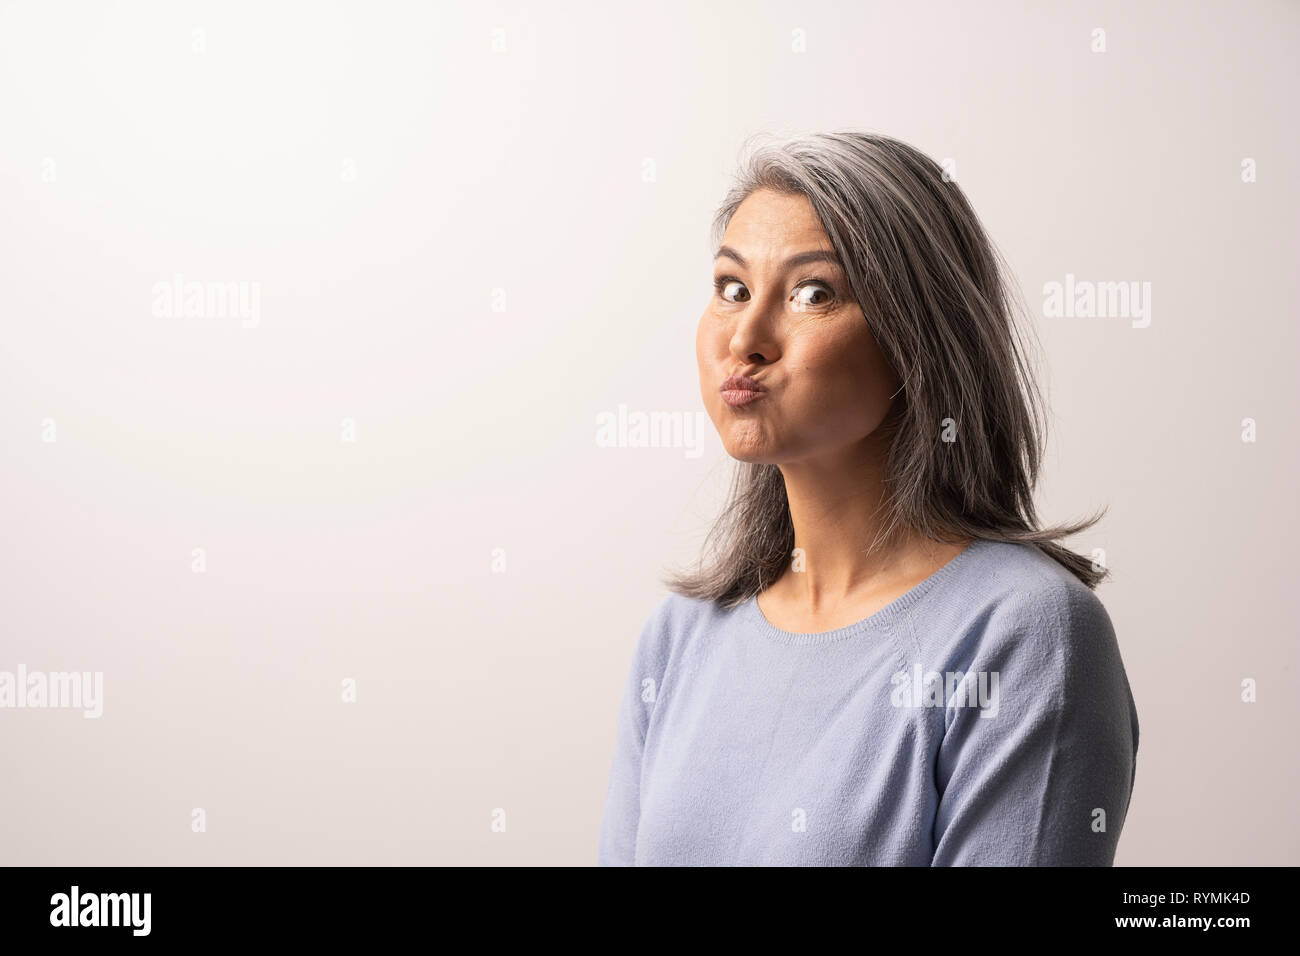 Beautiful mature woman is making funny faces Stock Photo